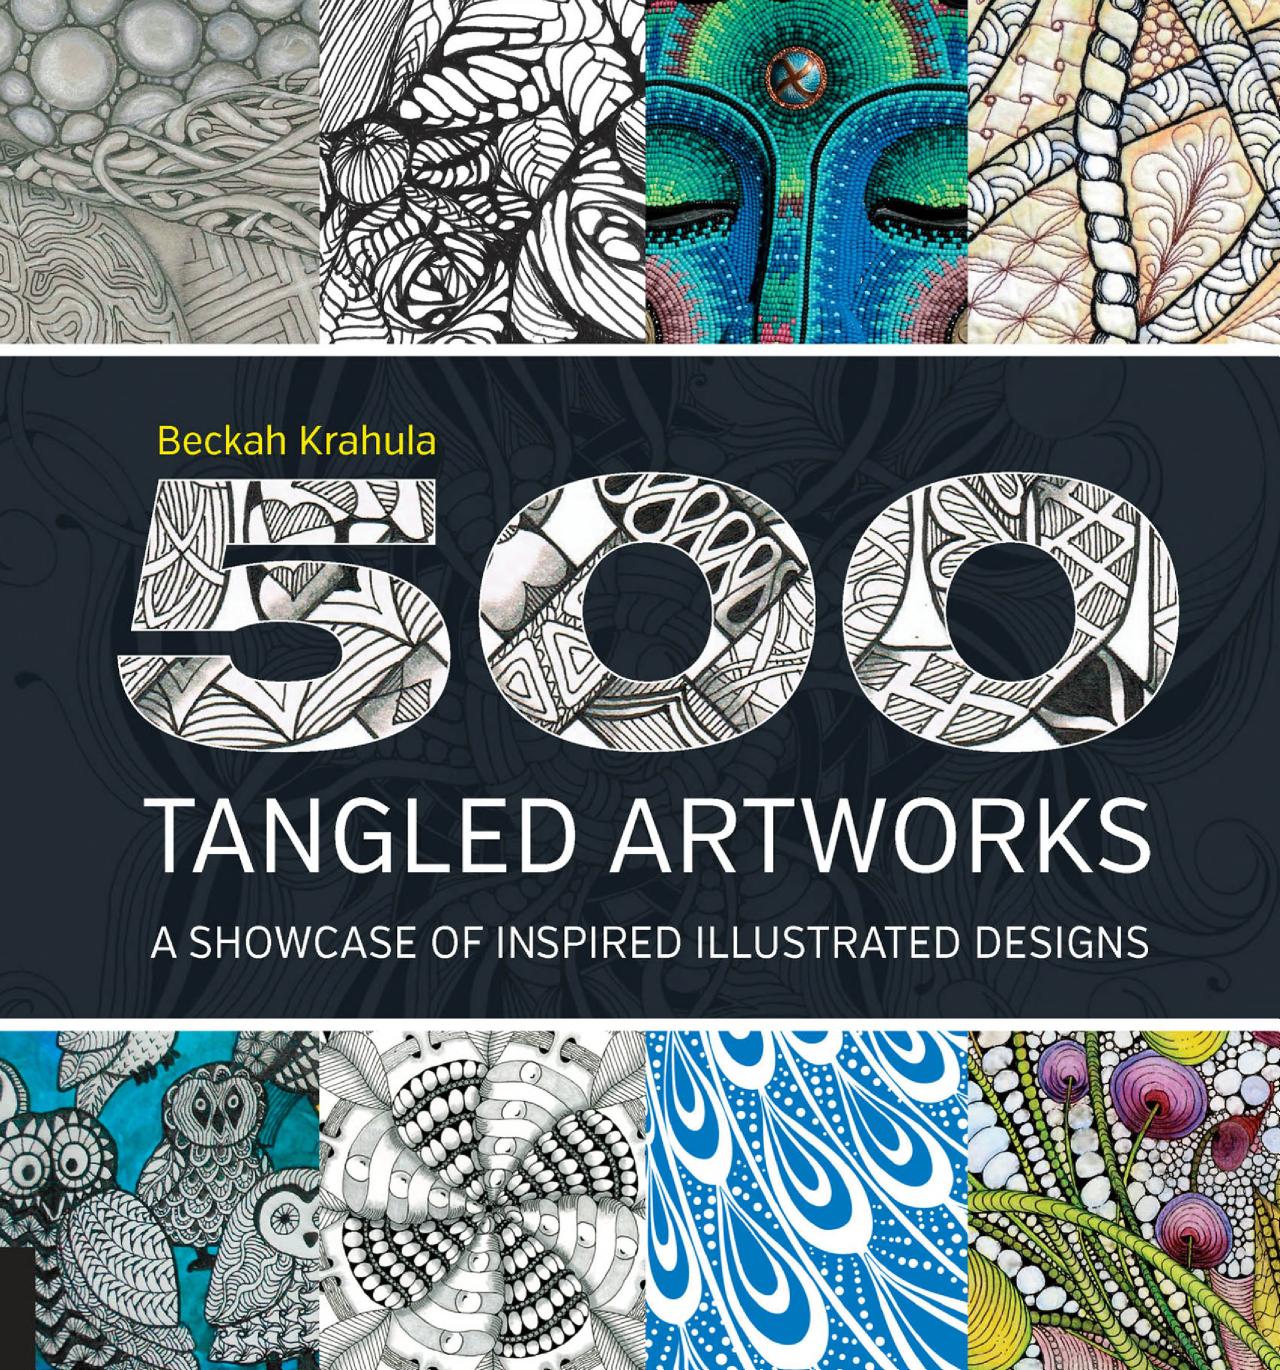 Book Review- 500 Tangled Artworks